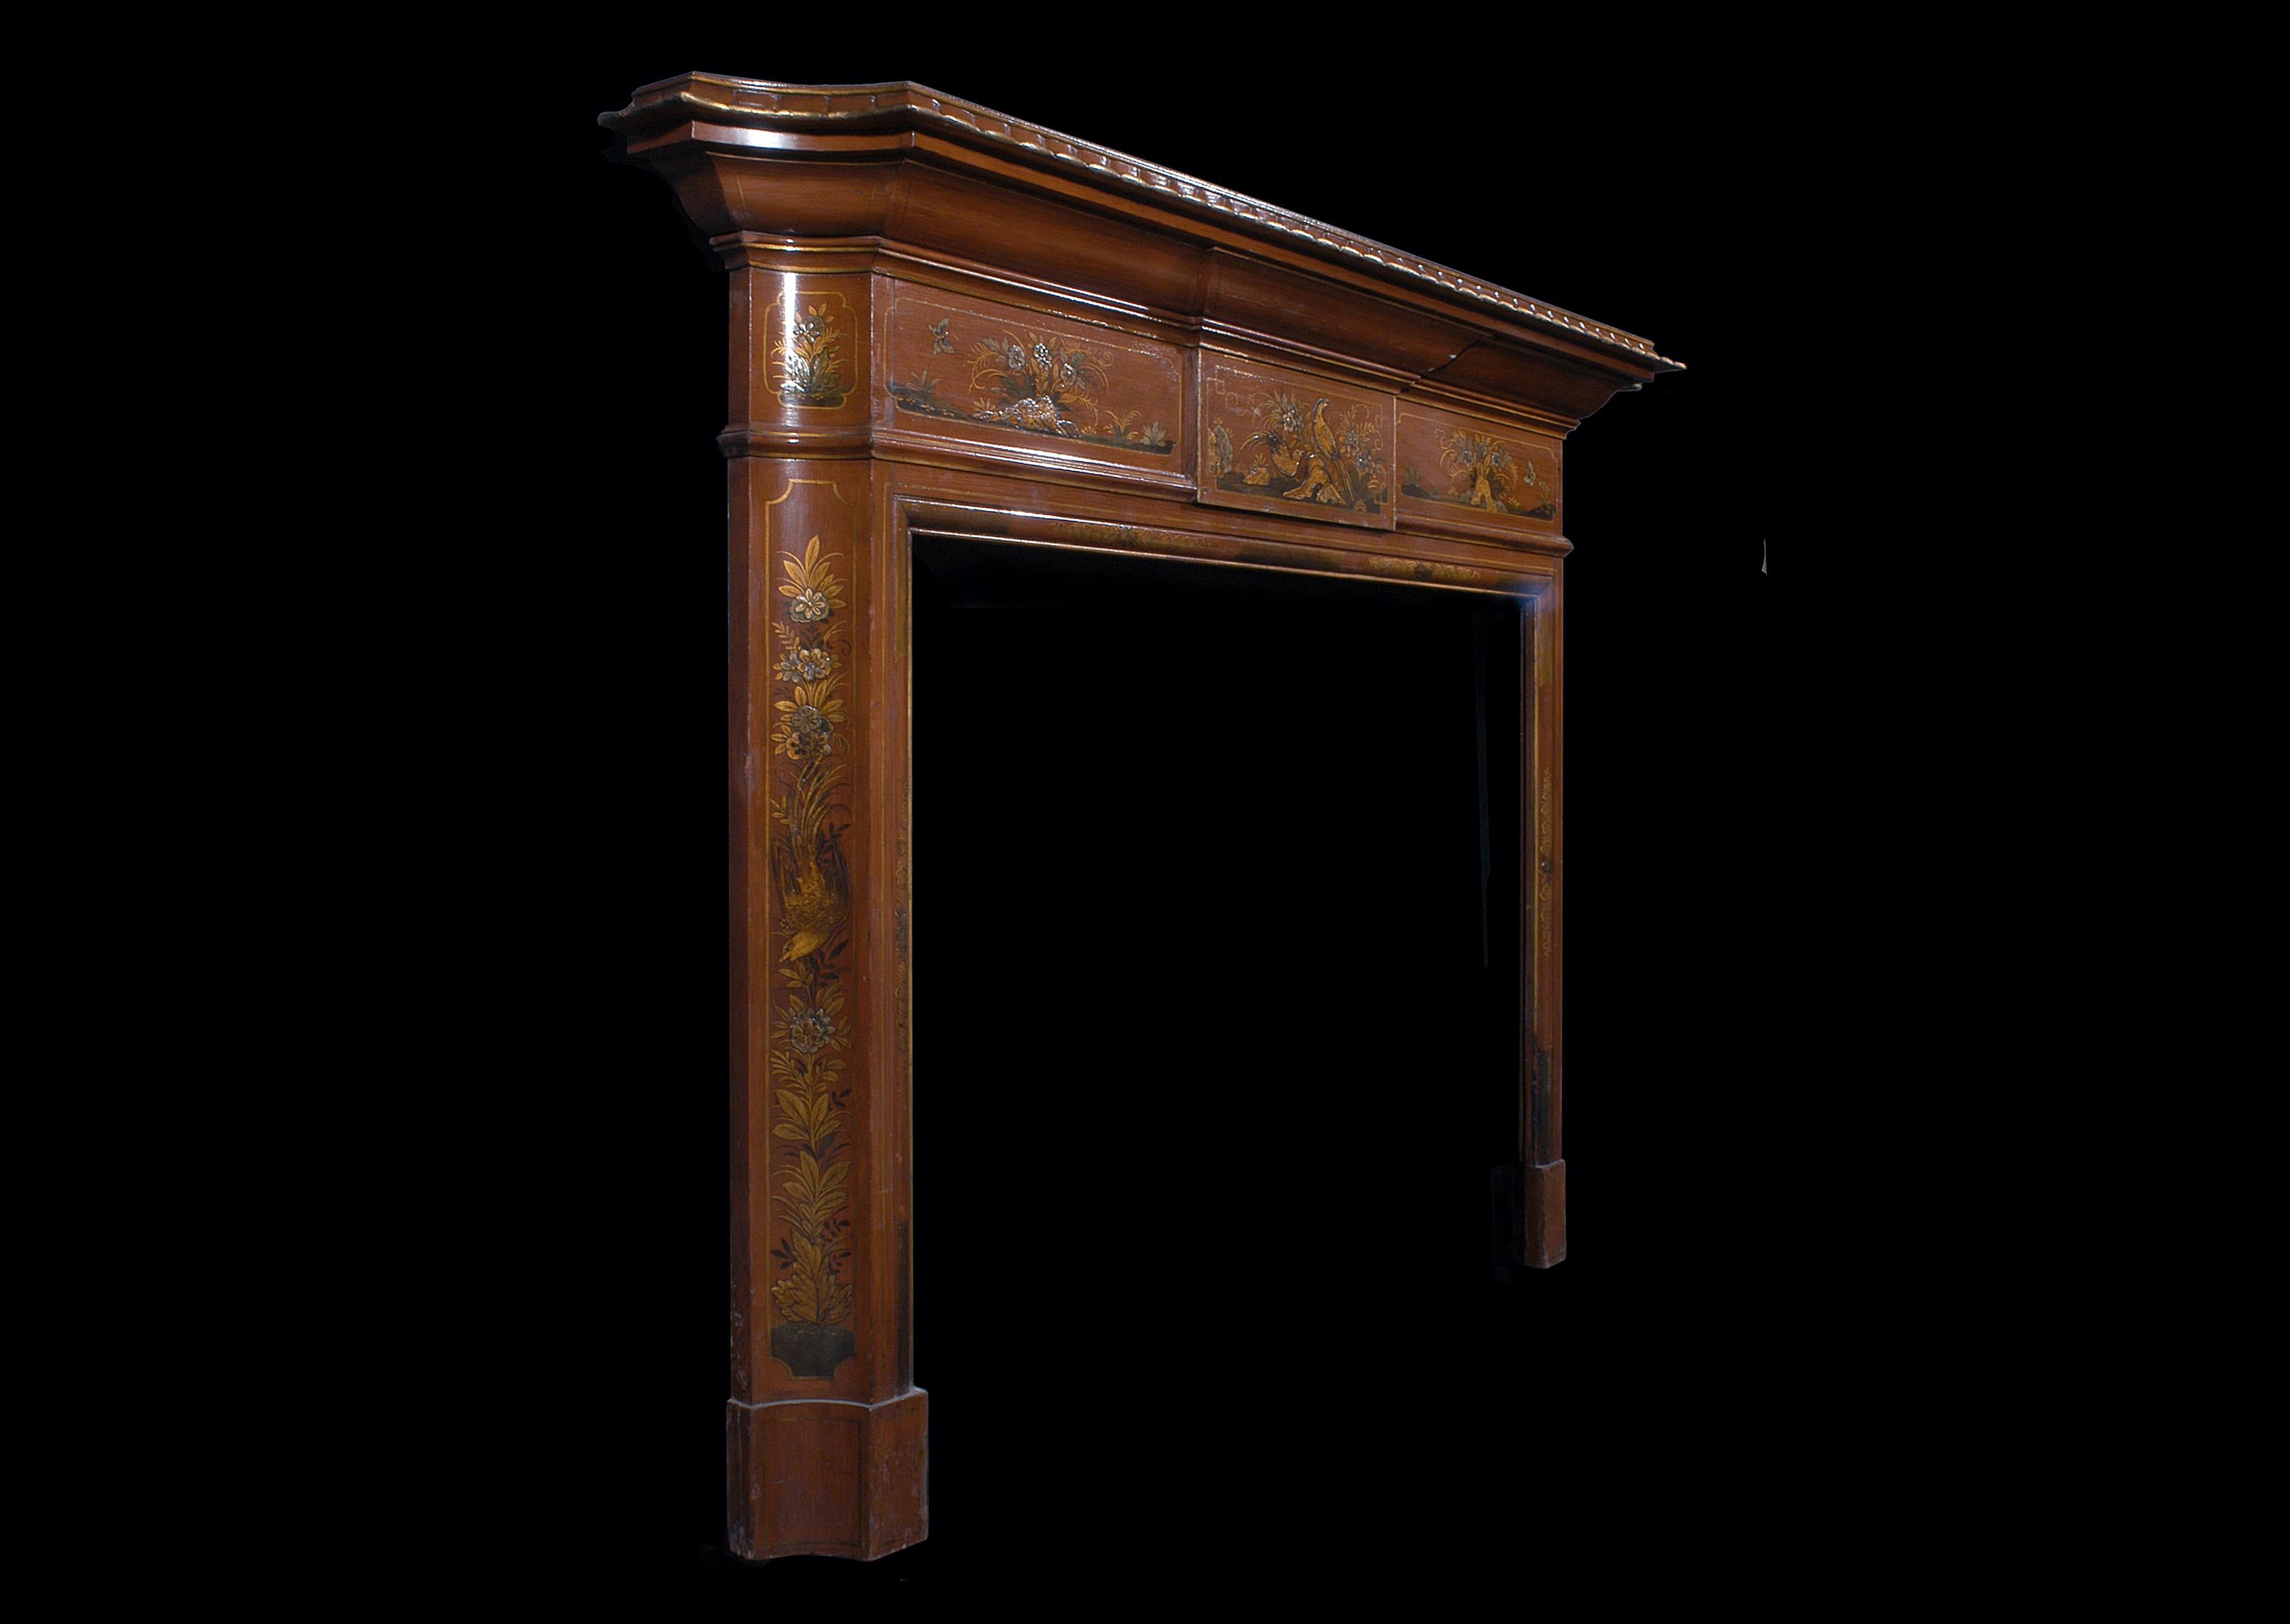 19th Century English Japanned Wood Fireplace In Good Condition For Sale In London, GB